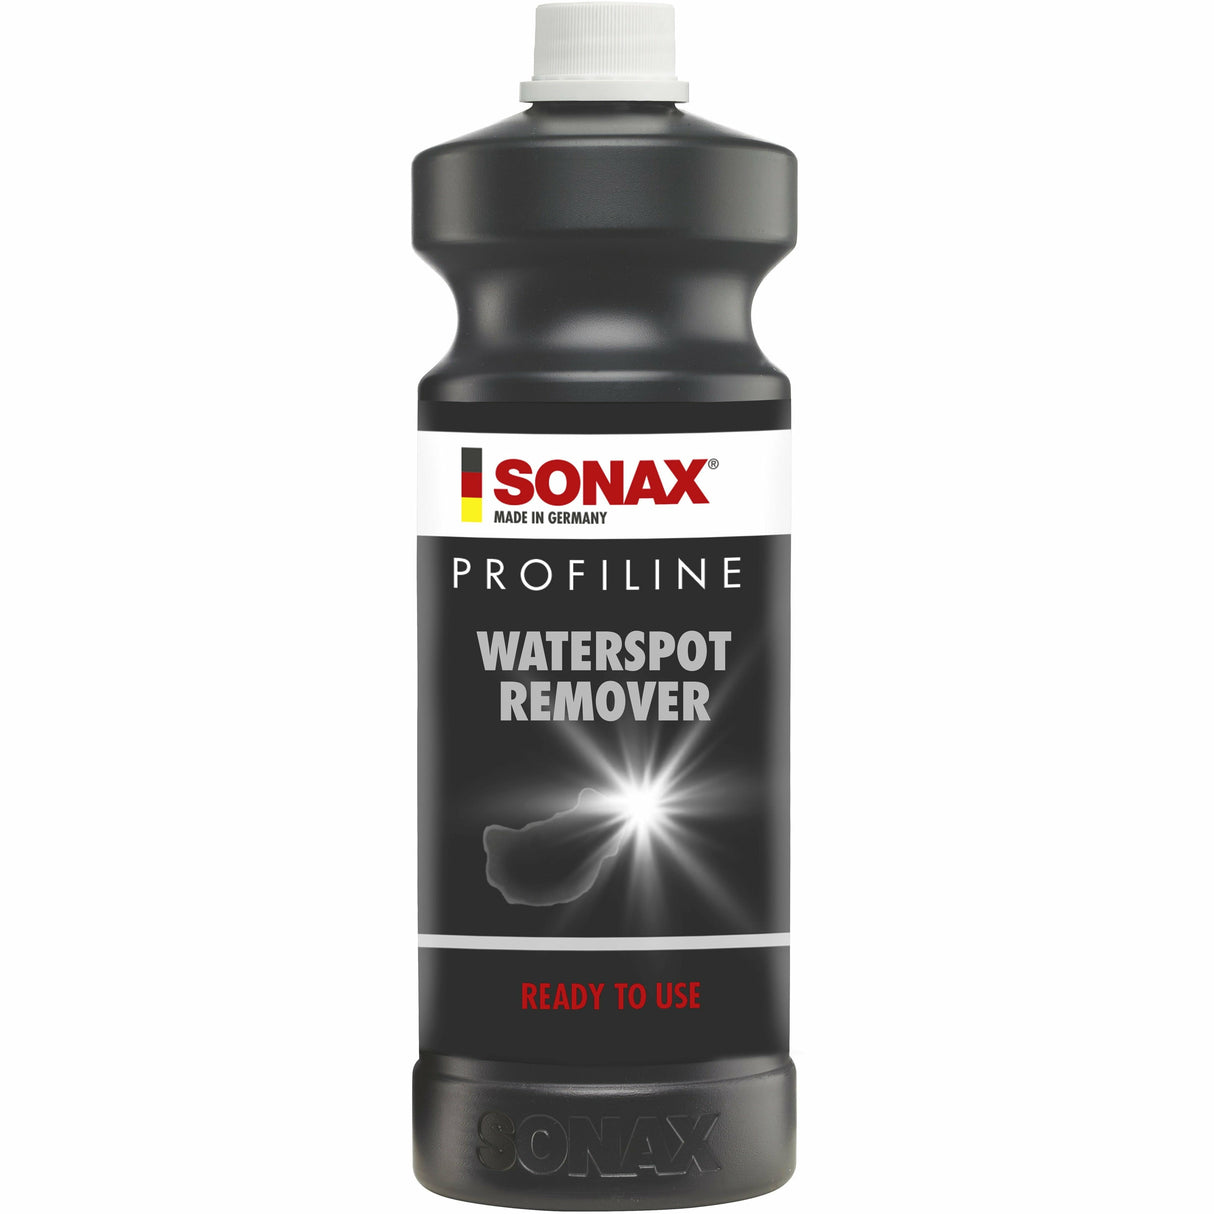 Sonax Profiline Waterspot Remover - Xpert Cleaning